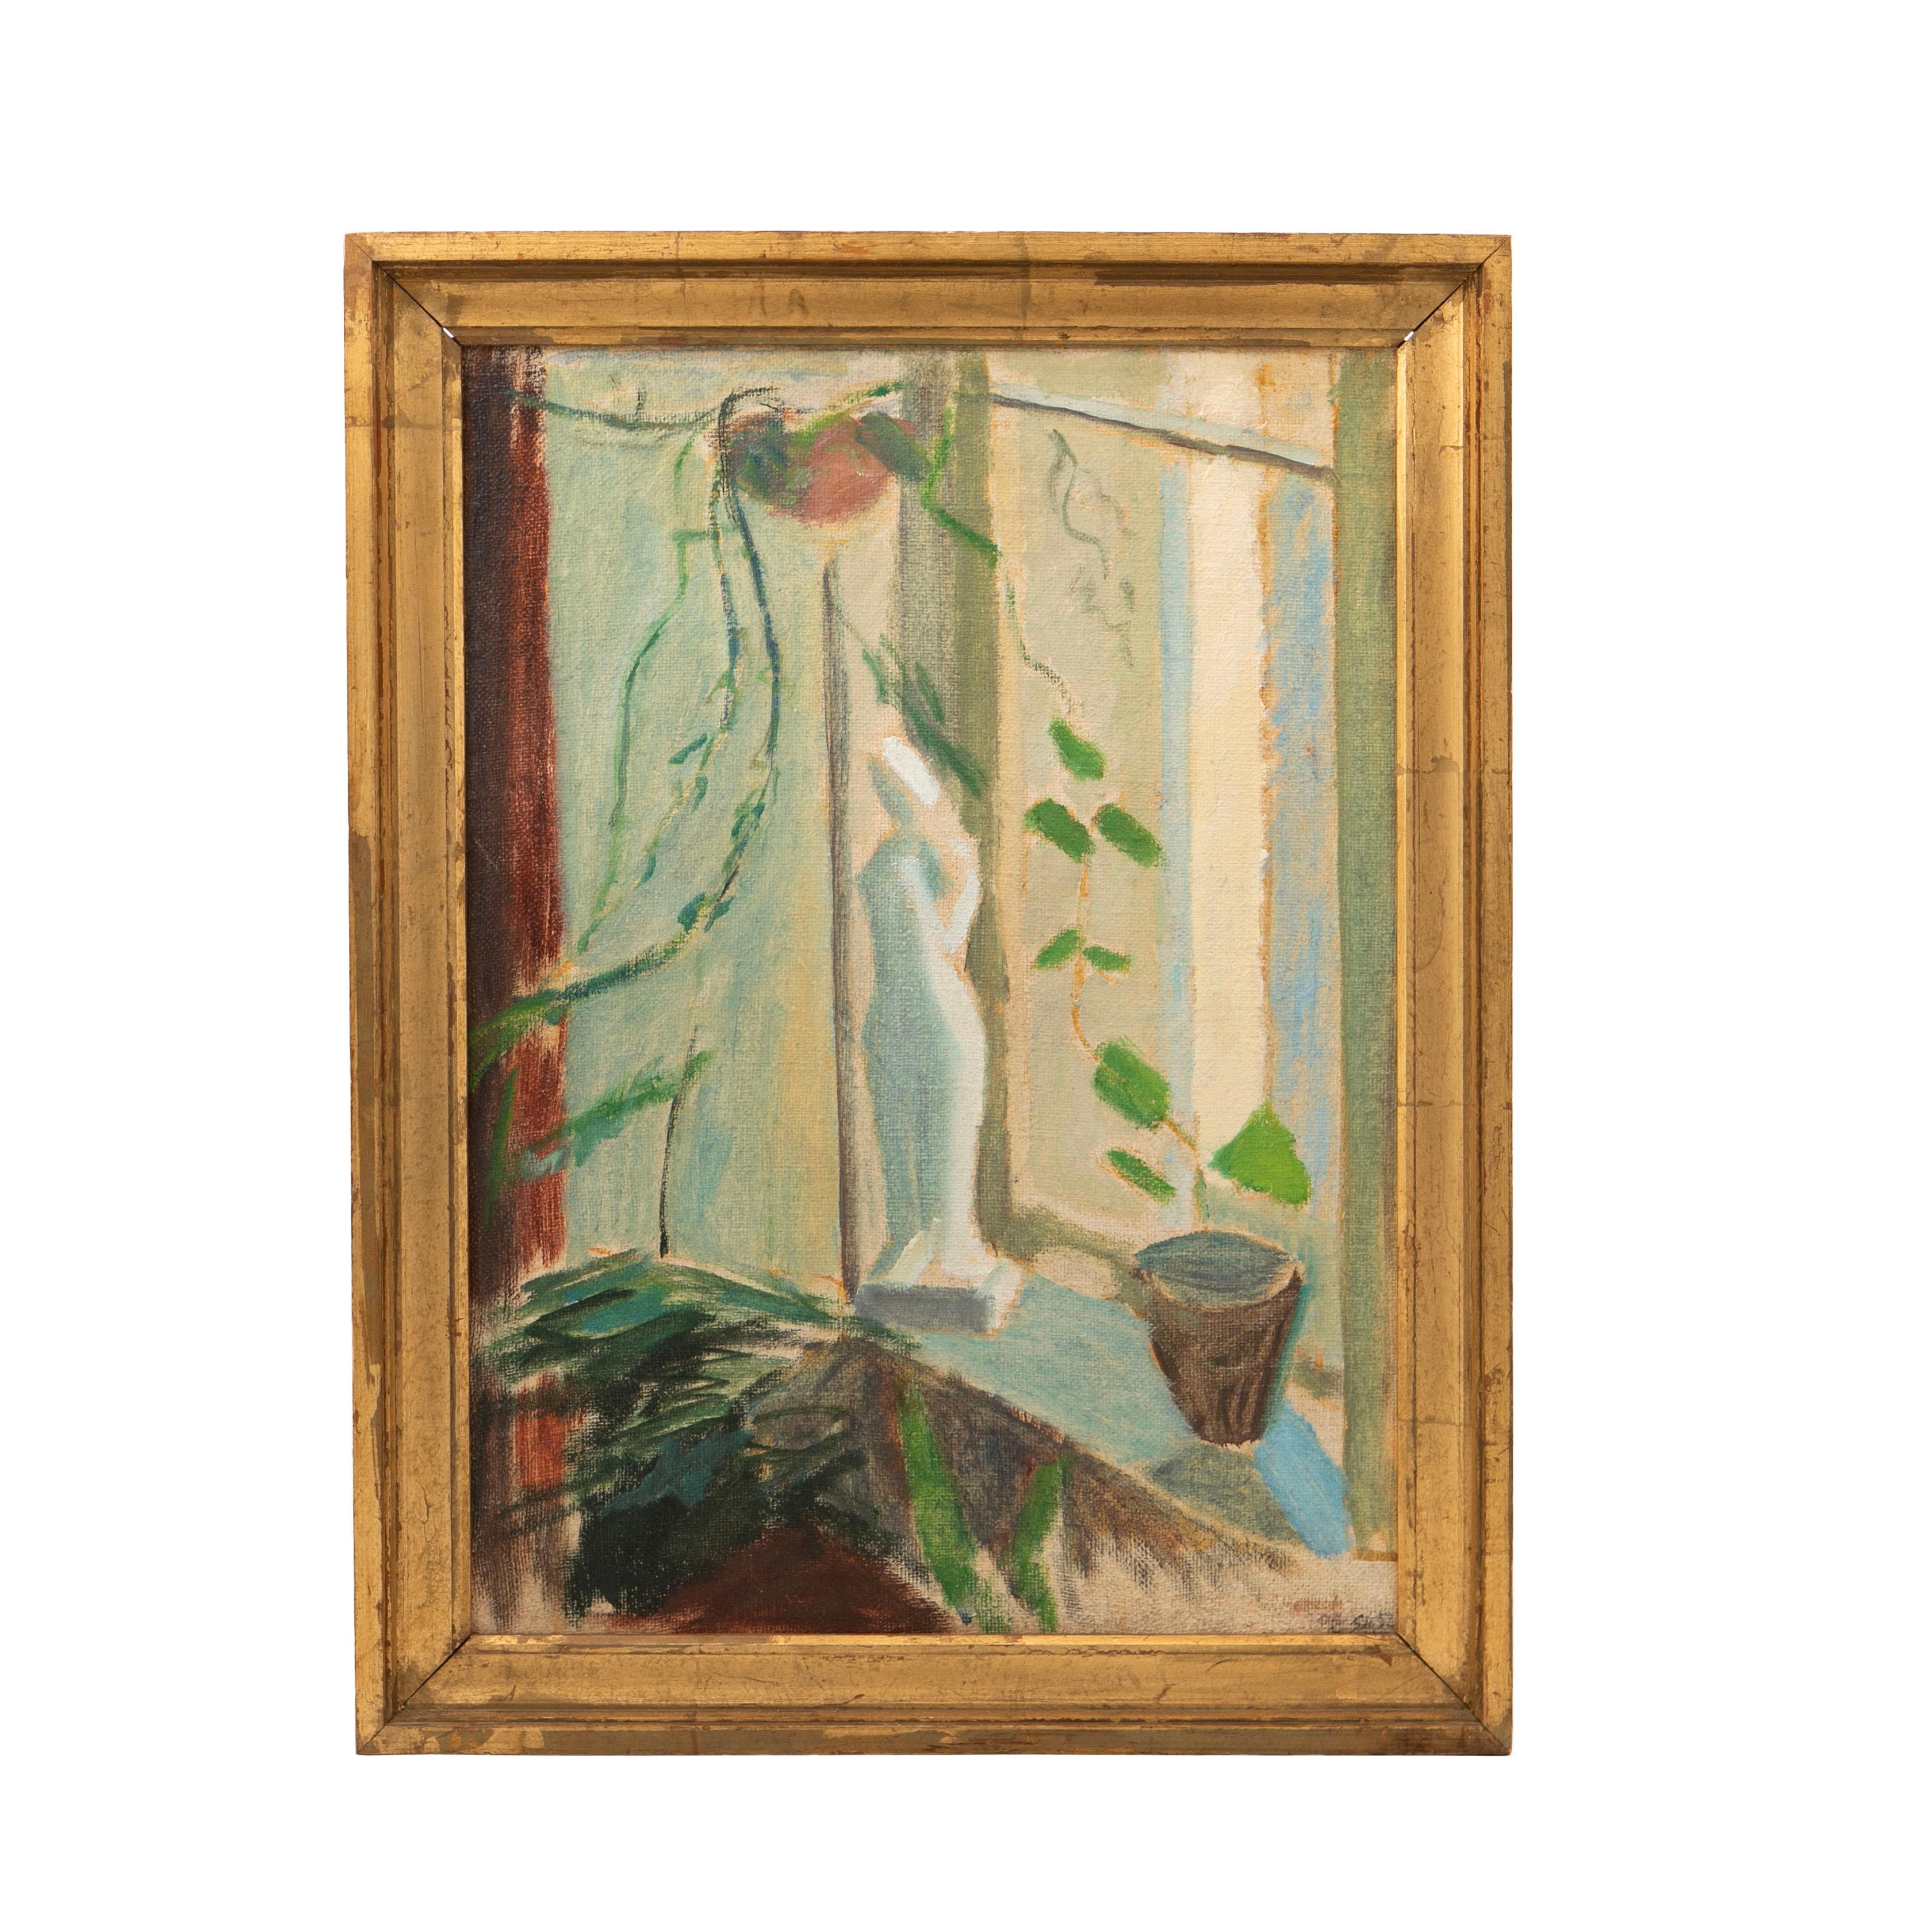 Christine Swane, Denmark, 1876-1960,
Oil on canvas. Stillife.

Visible size: 61x44 cm. With gilt wood frame: 71x54x5 cm
Signed with monogram CS and dated 1952

Christine Swane (born Larsen 29 May 1876 in Kerteminde, died 16 August 1960 in Farum) was